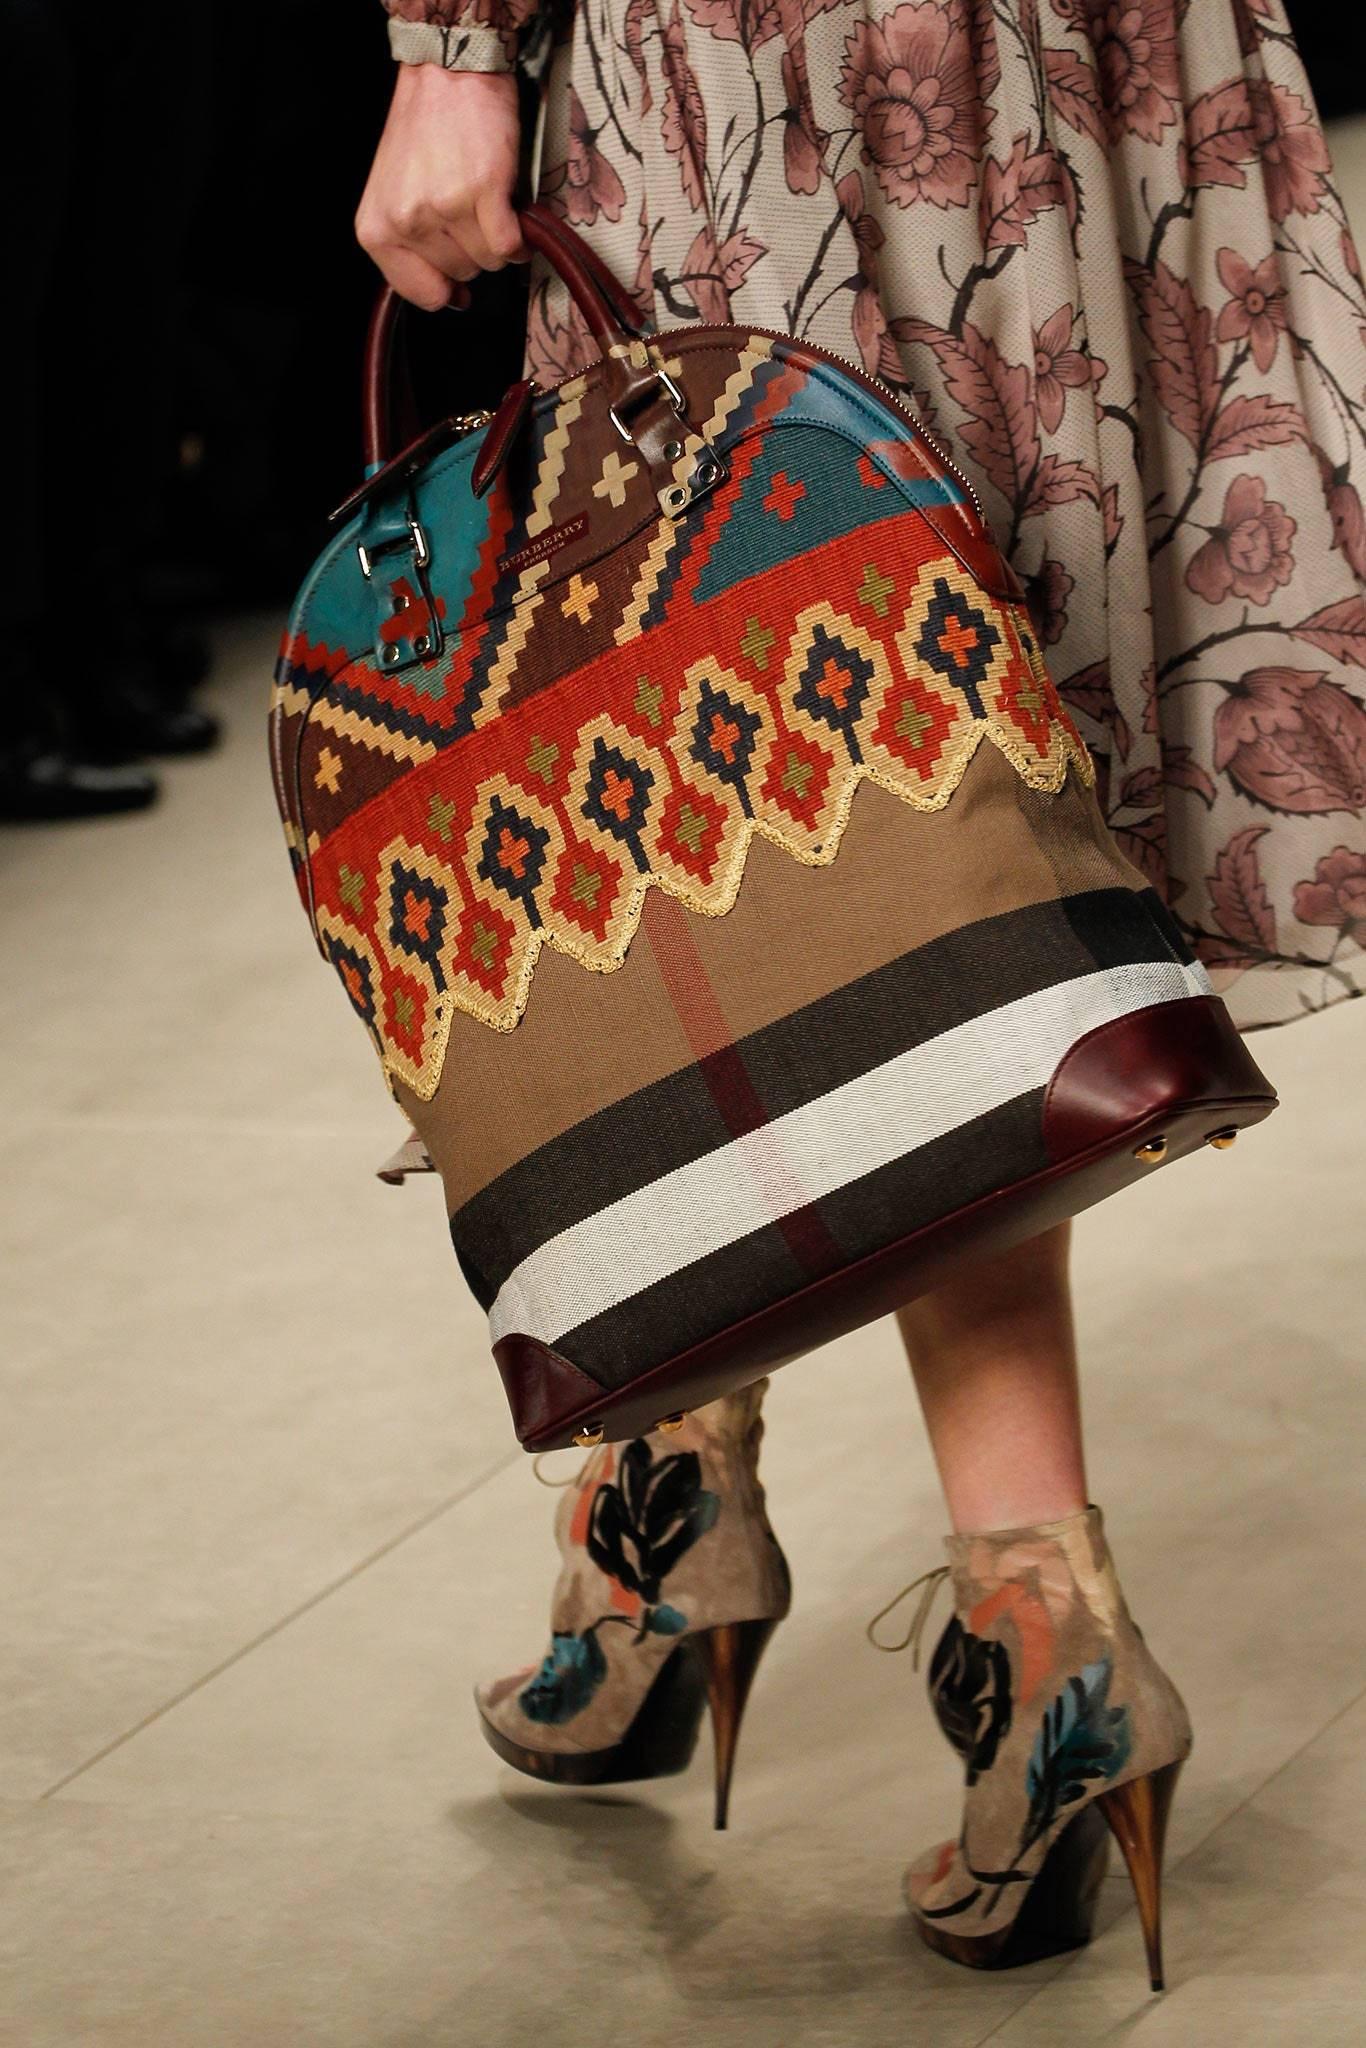 Burberry Prorsum Fall 2014 St Ives Canvas Handle Bag by Christopher Bailey. Red, Native American blanket-print textiles, Patterned, Gold-Tone Hardware, Leather Painted Trim, Rolled Handles & Single Shoulder Strap, Canvas Lining & Three Interior